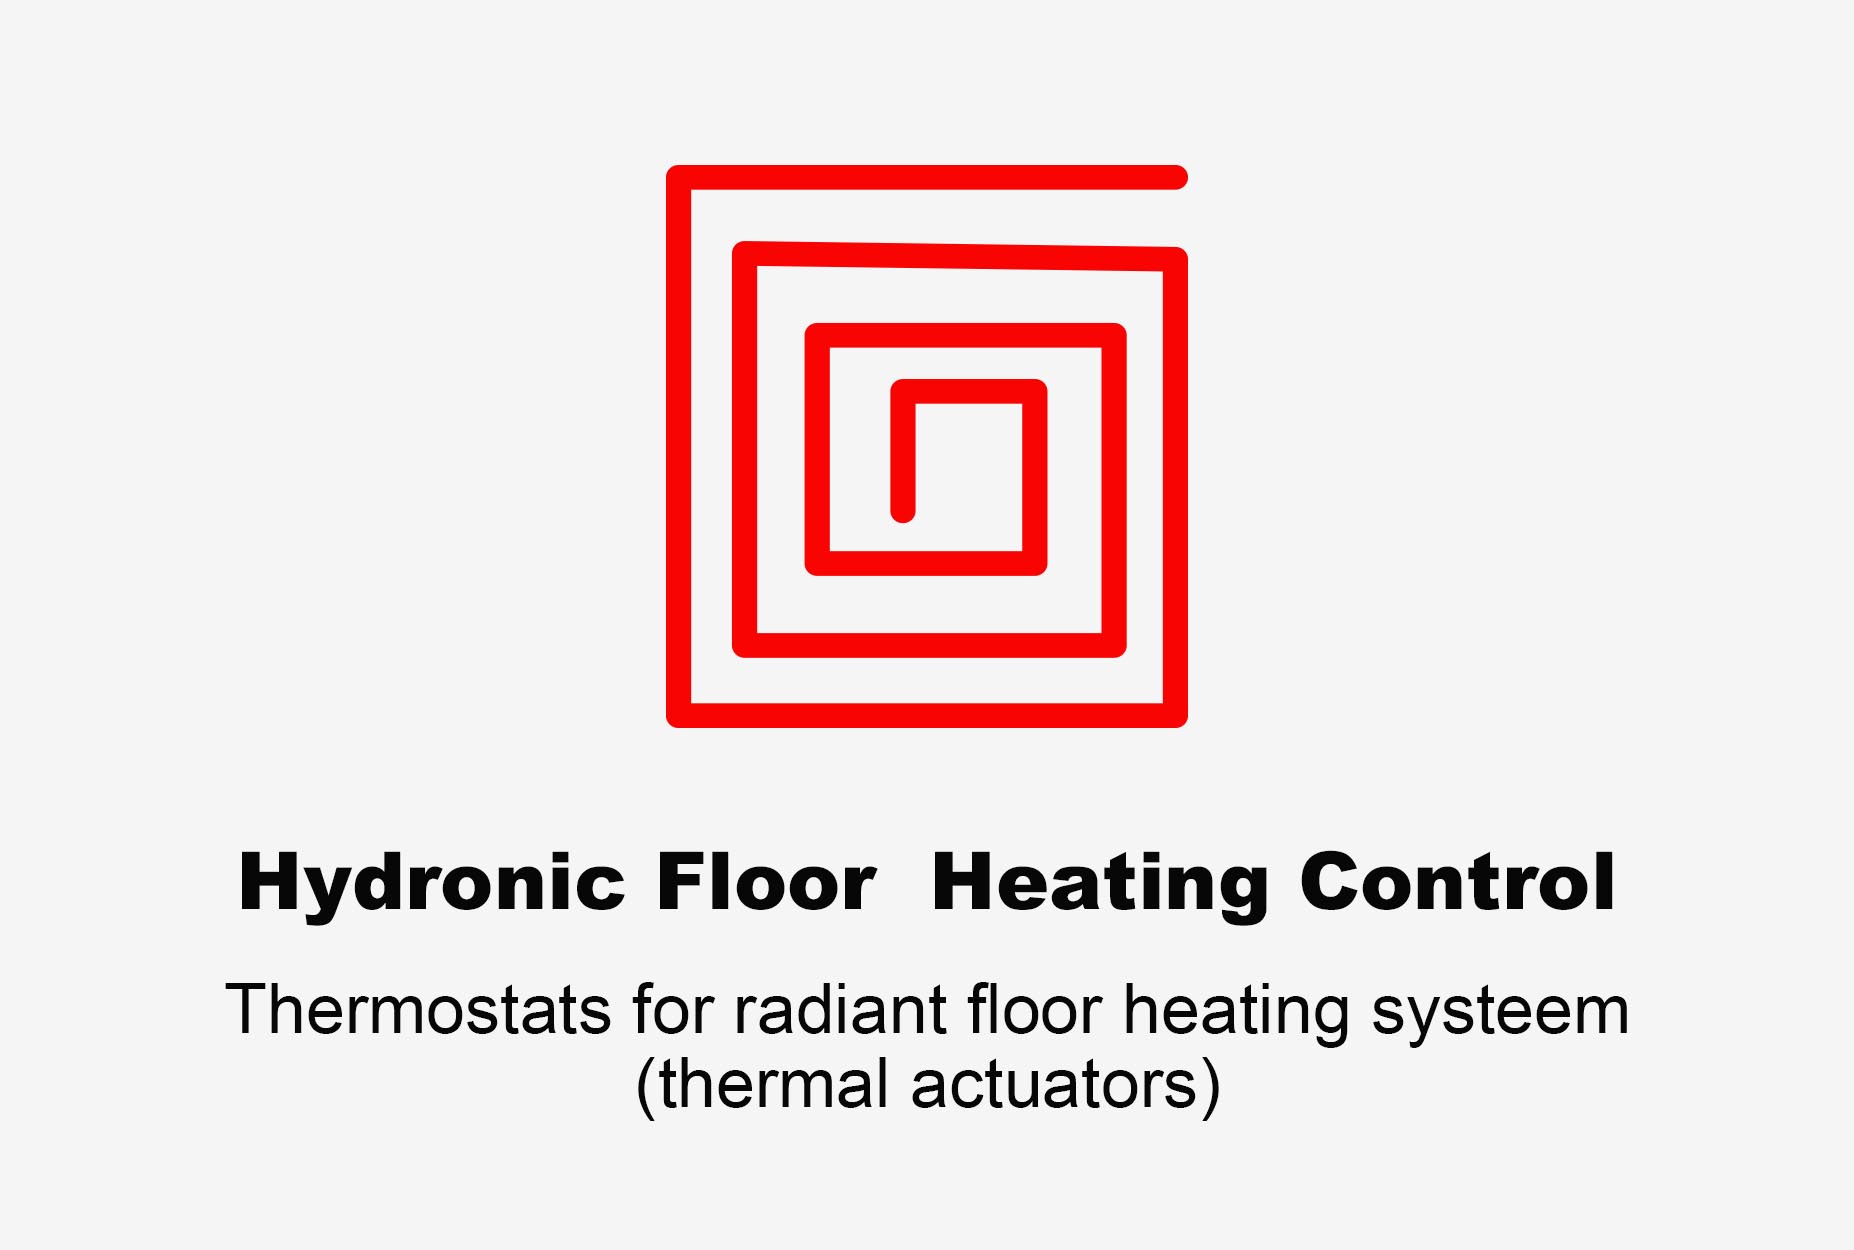 Hydronic Heating Thermostat, underfloor heating thermostat, heating and cooling thermostat, zigbee thermostat, wifi thermostat, alexa thermostat, google home thermostat